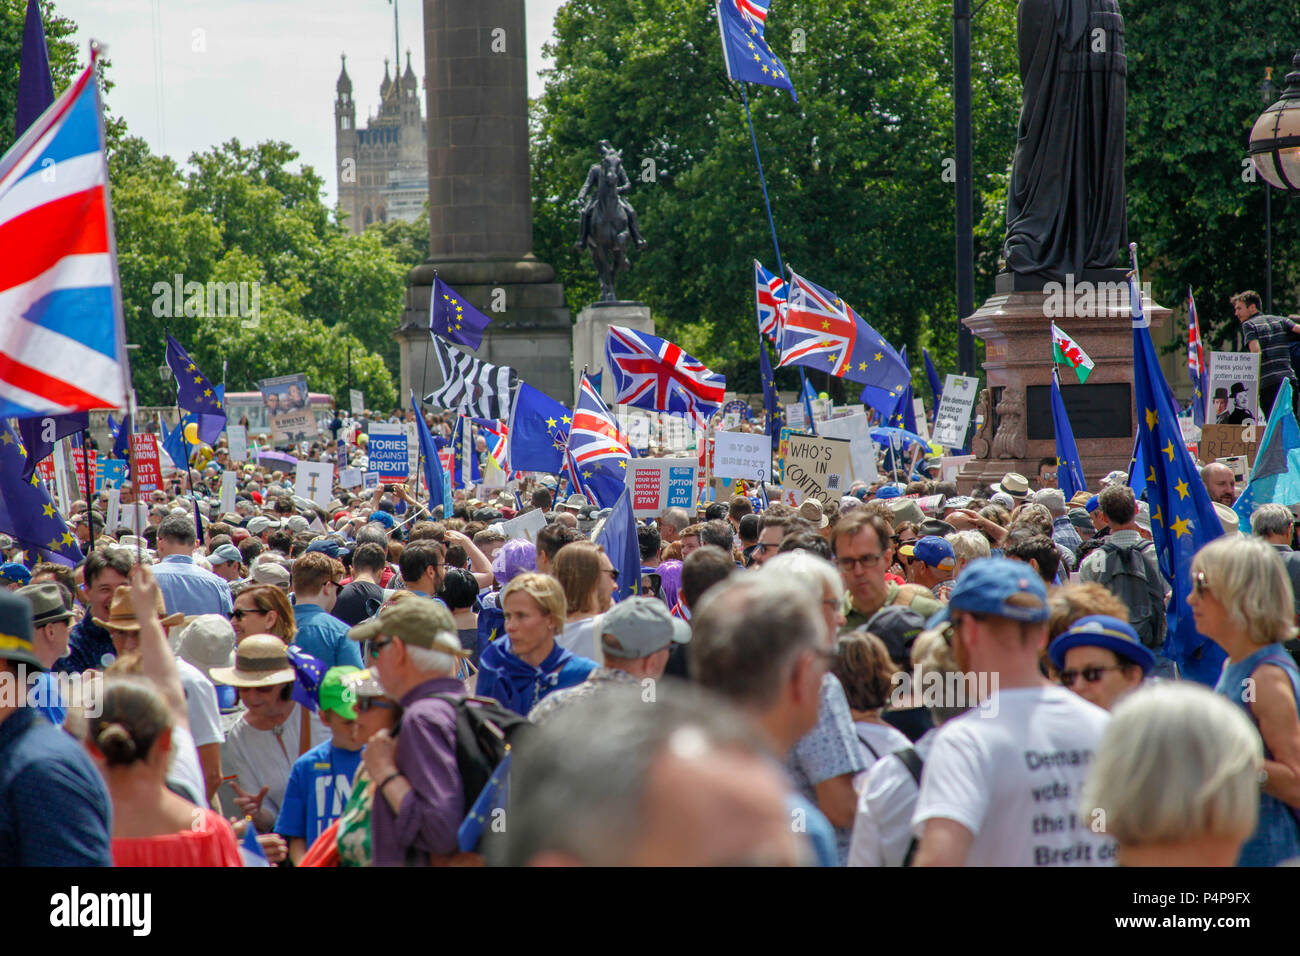 London, UK. 23rd June 2018. Anti-Brexit protesters at the People's Vote March Credit: Alex Cavendish/Alamy Live News Stock Photo